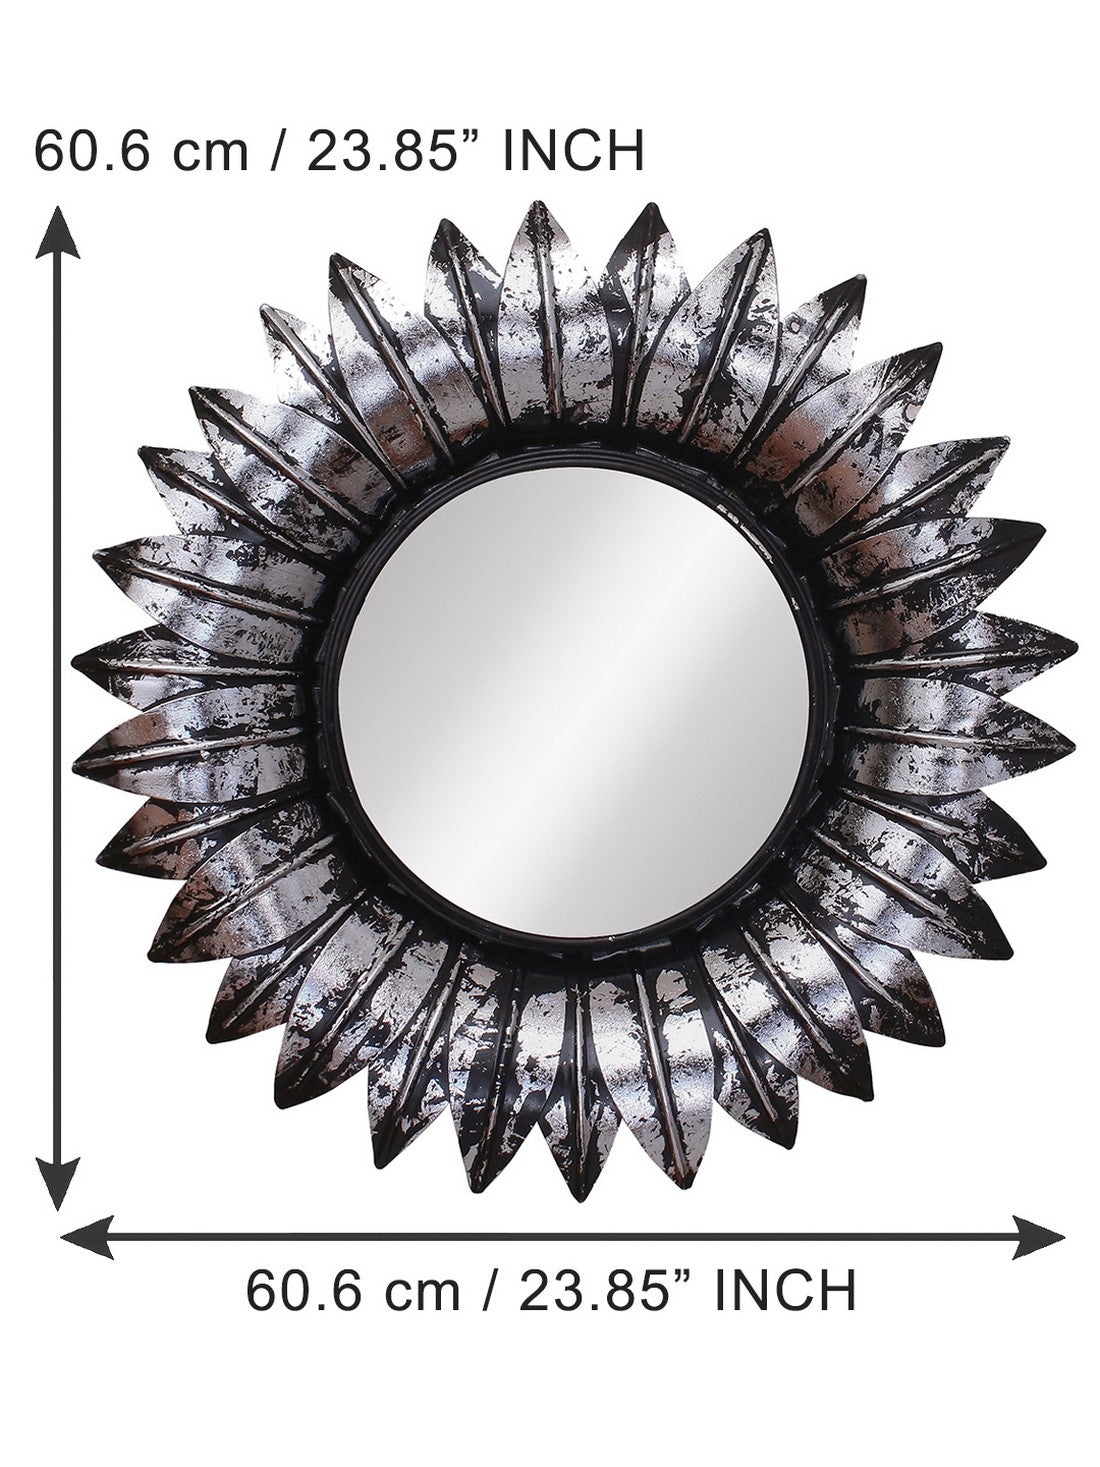 Grey and Black Decorative Metal Handcarved Wall Mirror 2